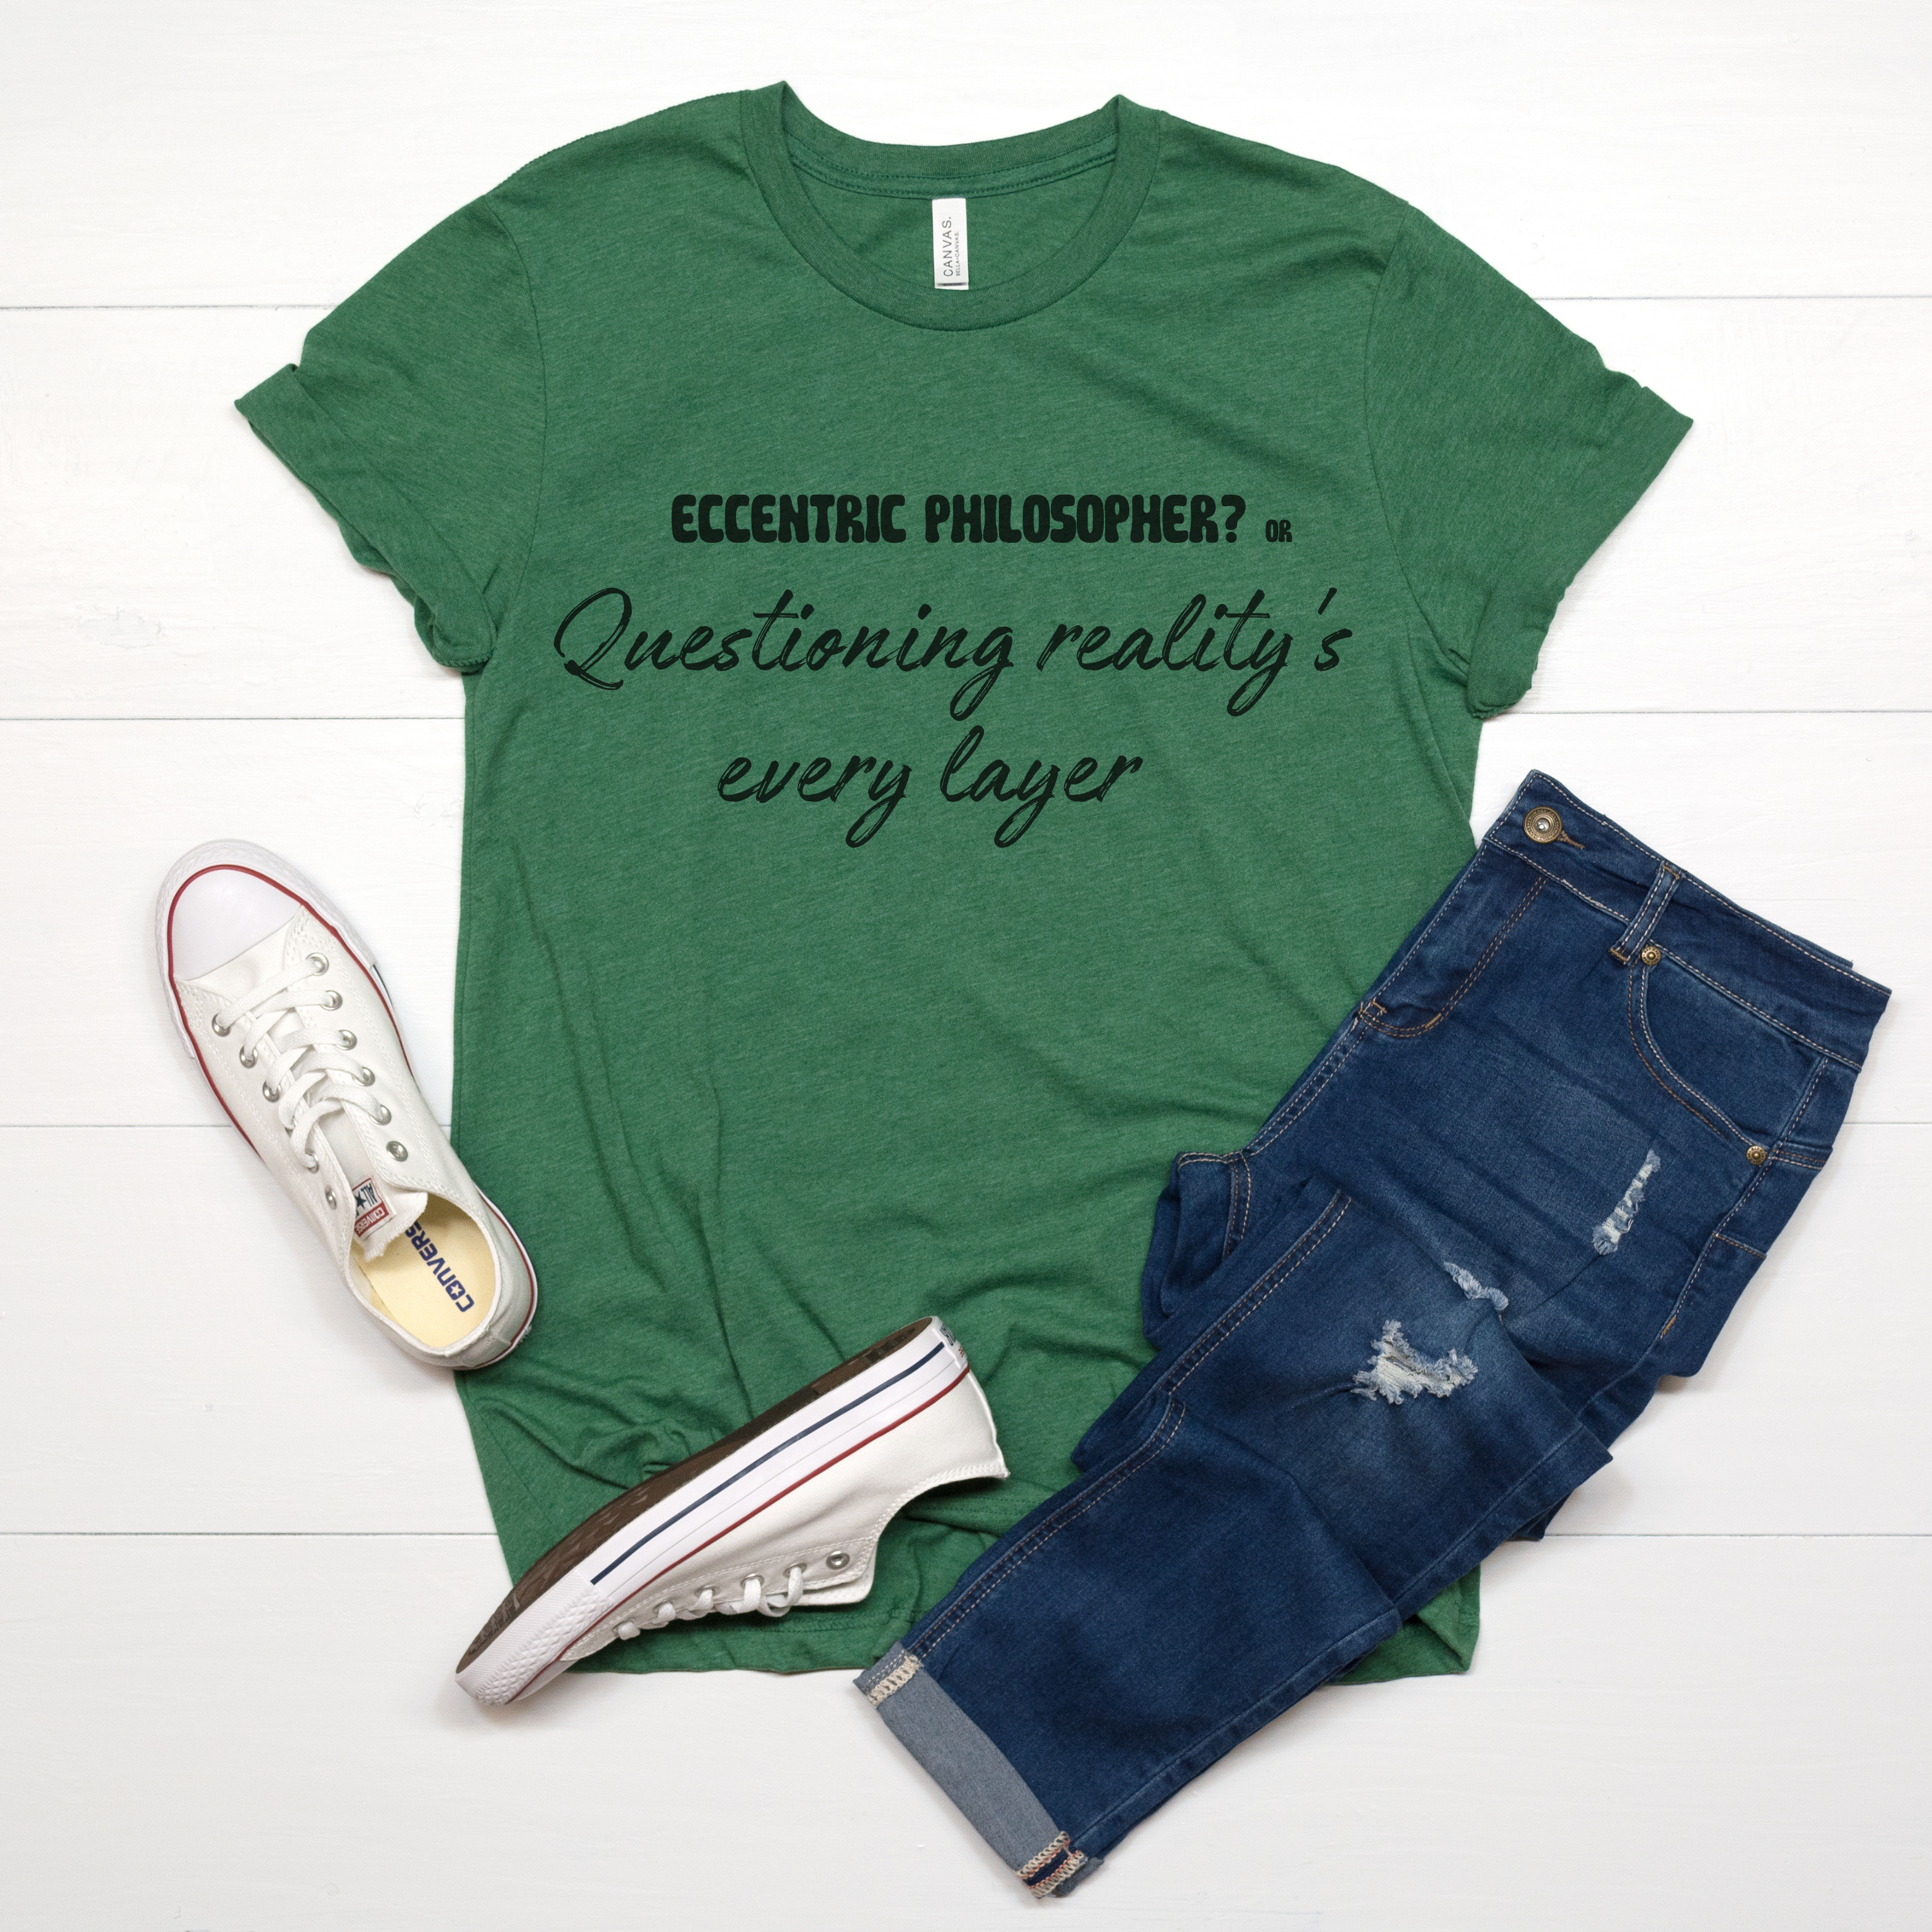 Eccentric philosopher? or Questioning reality's every layer T-shirt